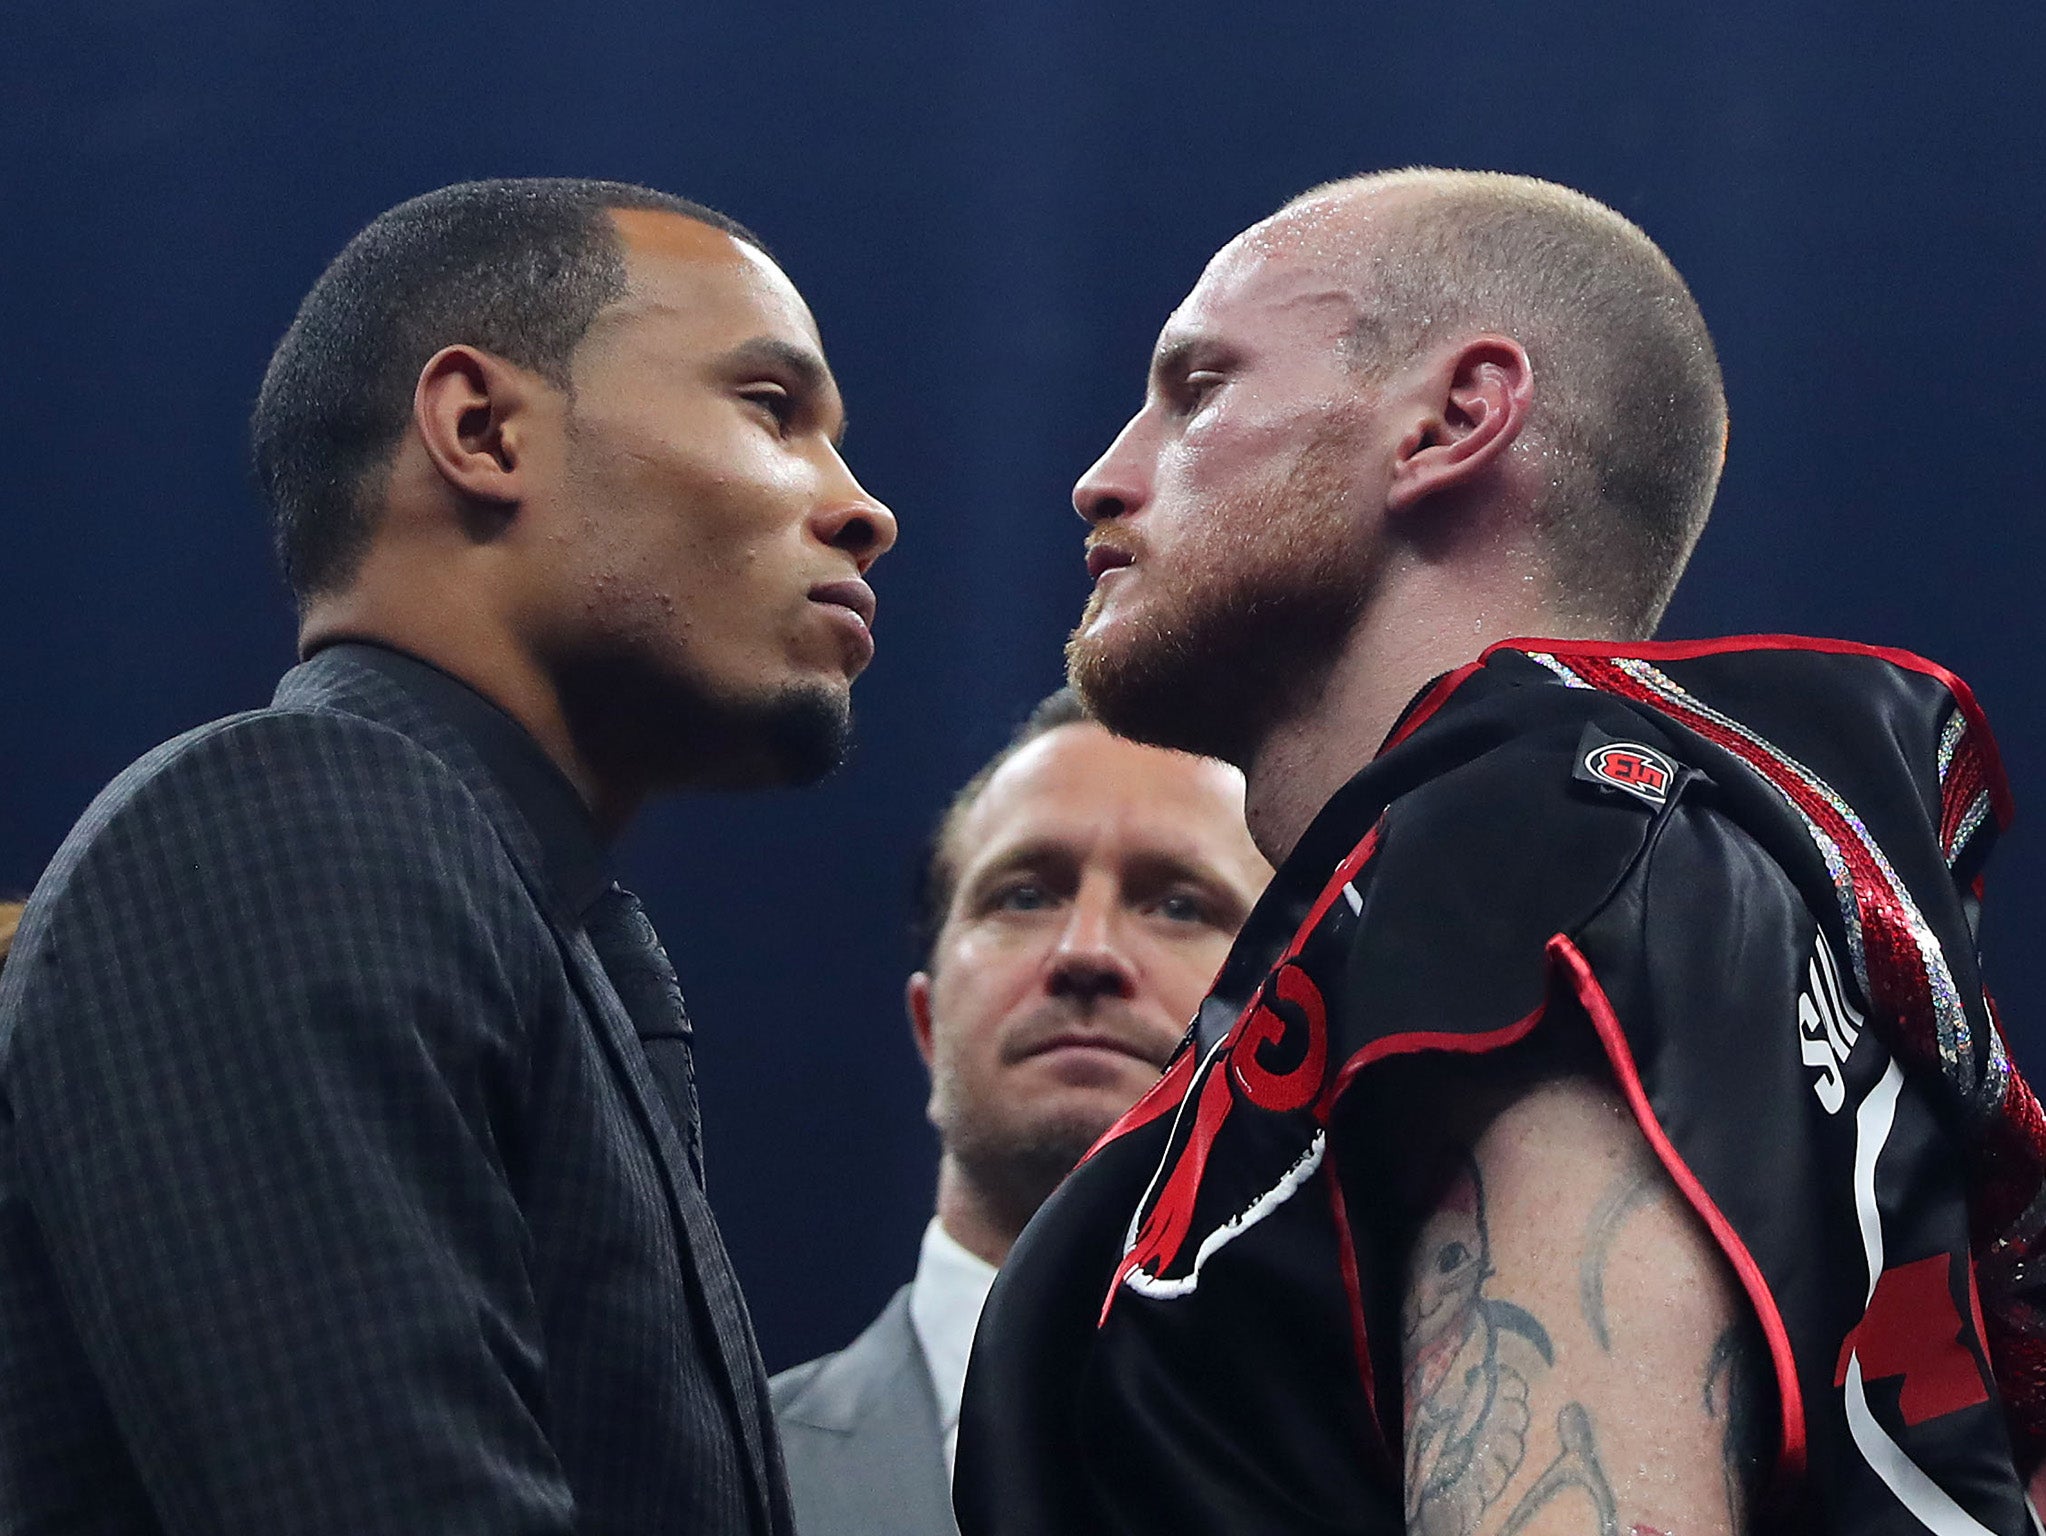 Eubank Jr and Groves are fighting for a place in the inaugural WBSS final